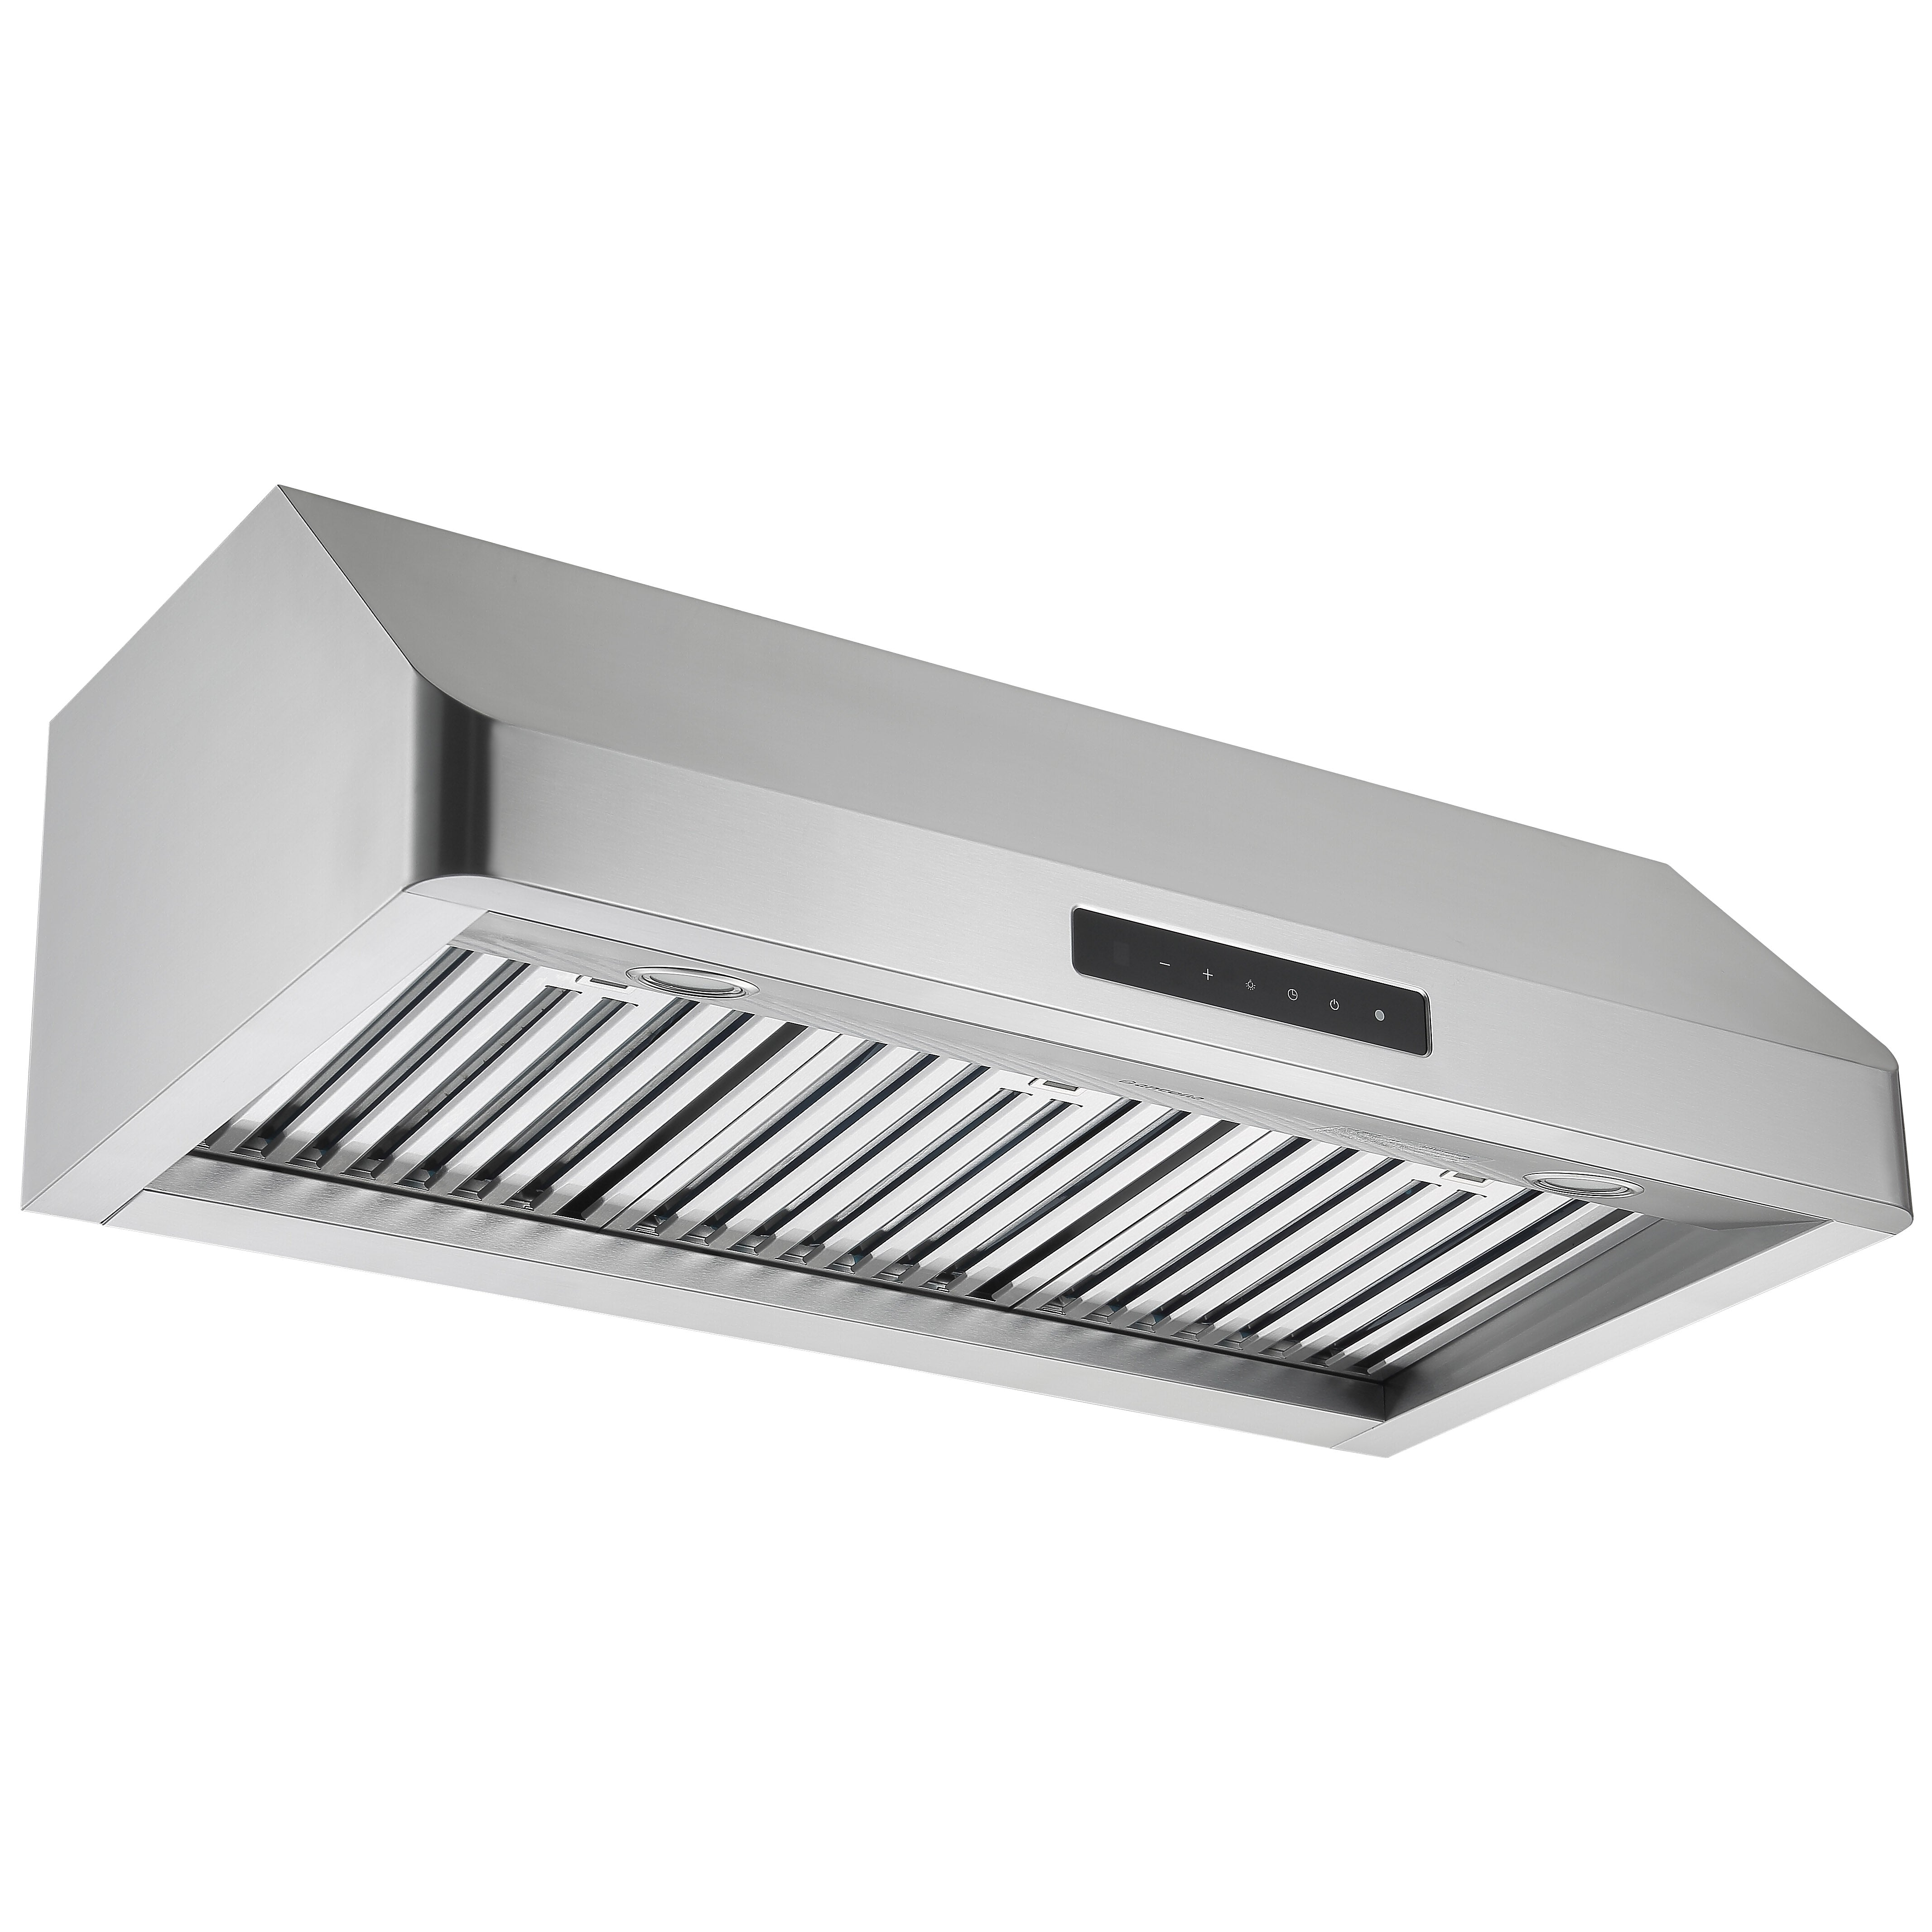 Ancona AN-1257 36 in. Pro Series Turbo Stainless Steel Under Cabinet Range Hood with Night Light Feature